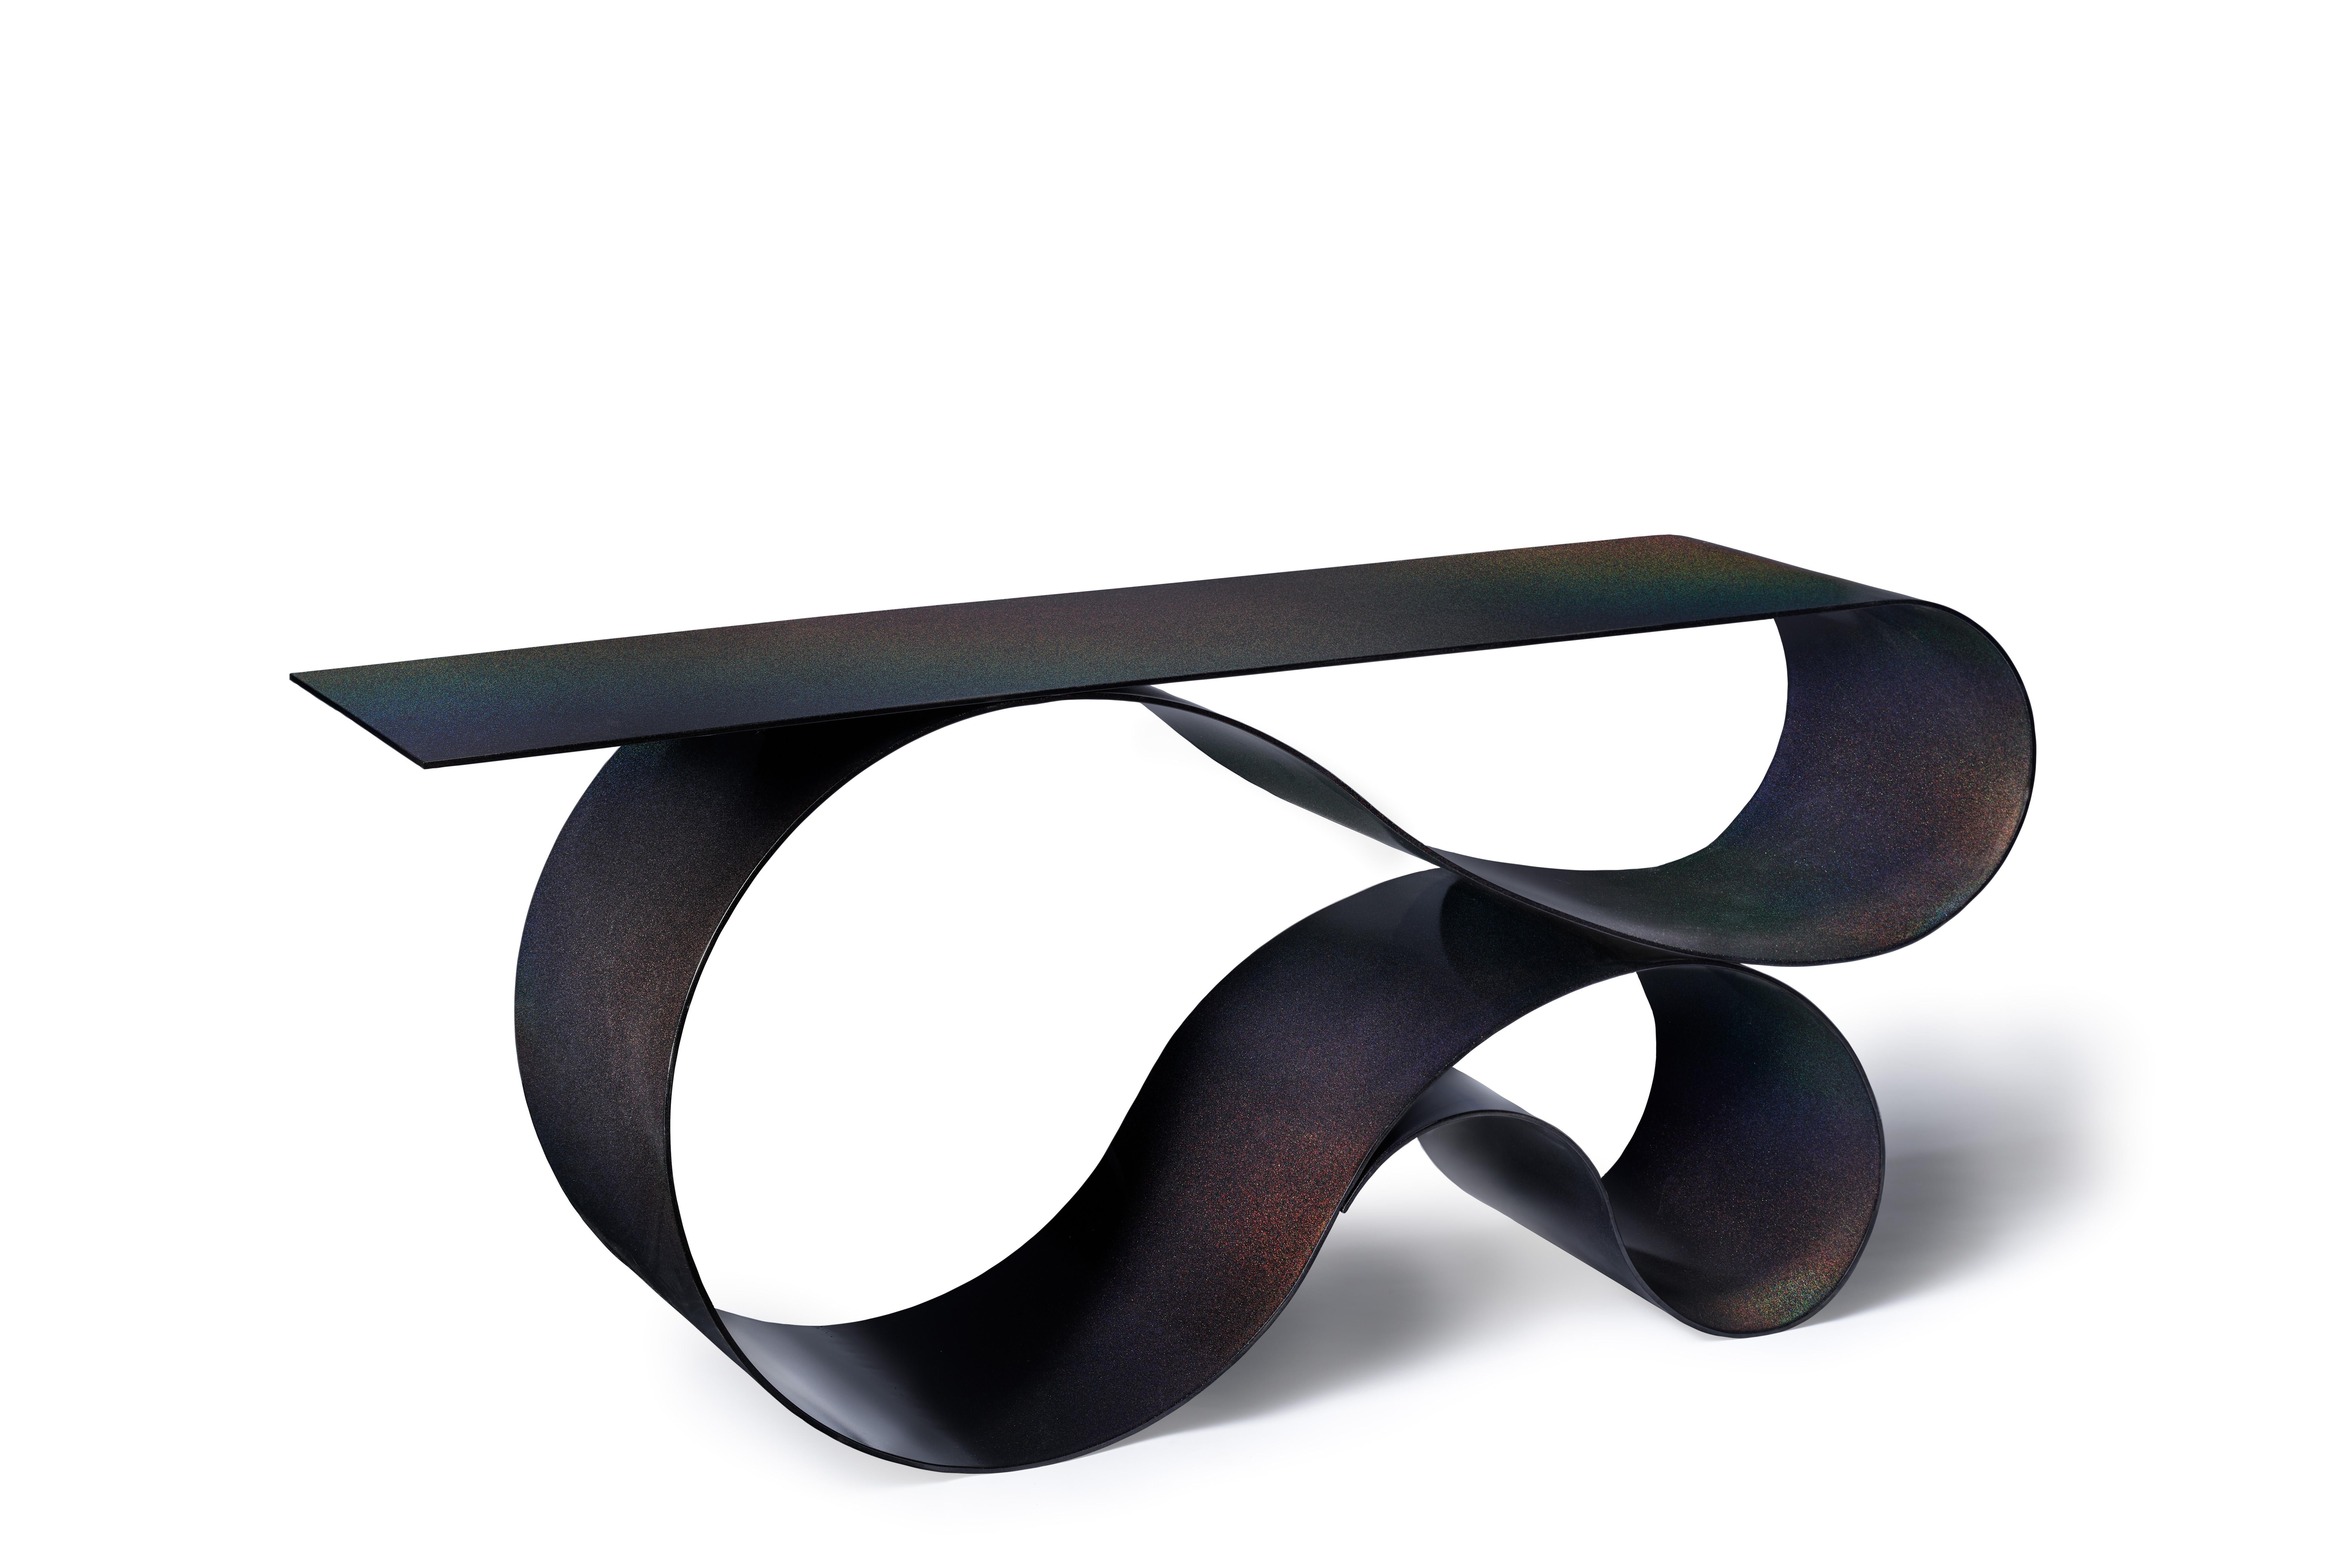 Whorl console in black iridescent powder coated aluminum by Neal Aronowitz Design
Dimensions: D 43.2 x W 160 x H 76.2 cm
Materials: Powder coated aluminium.
Size, colors and finish can be modified and customized. 

An elegant and powerful